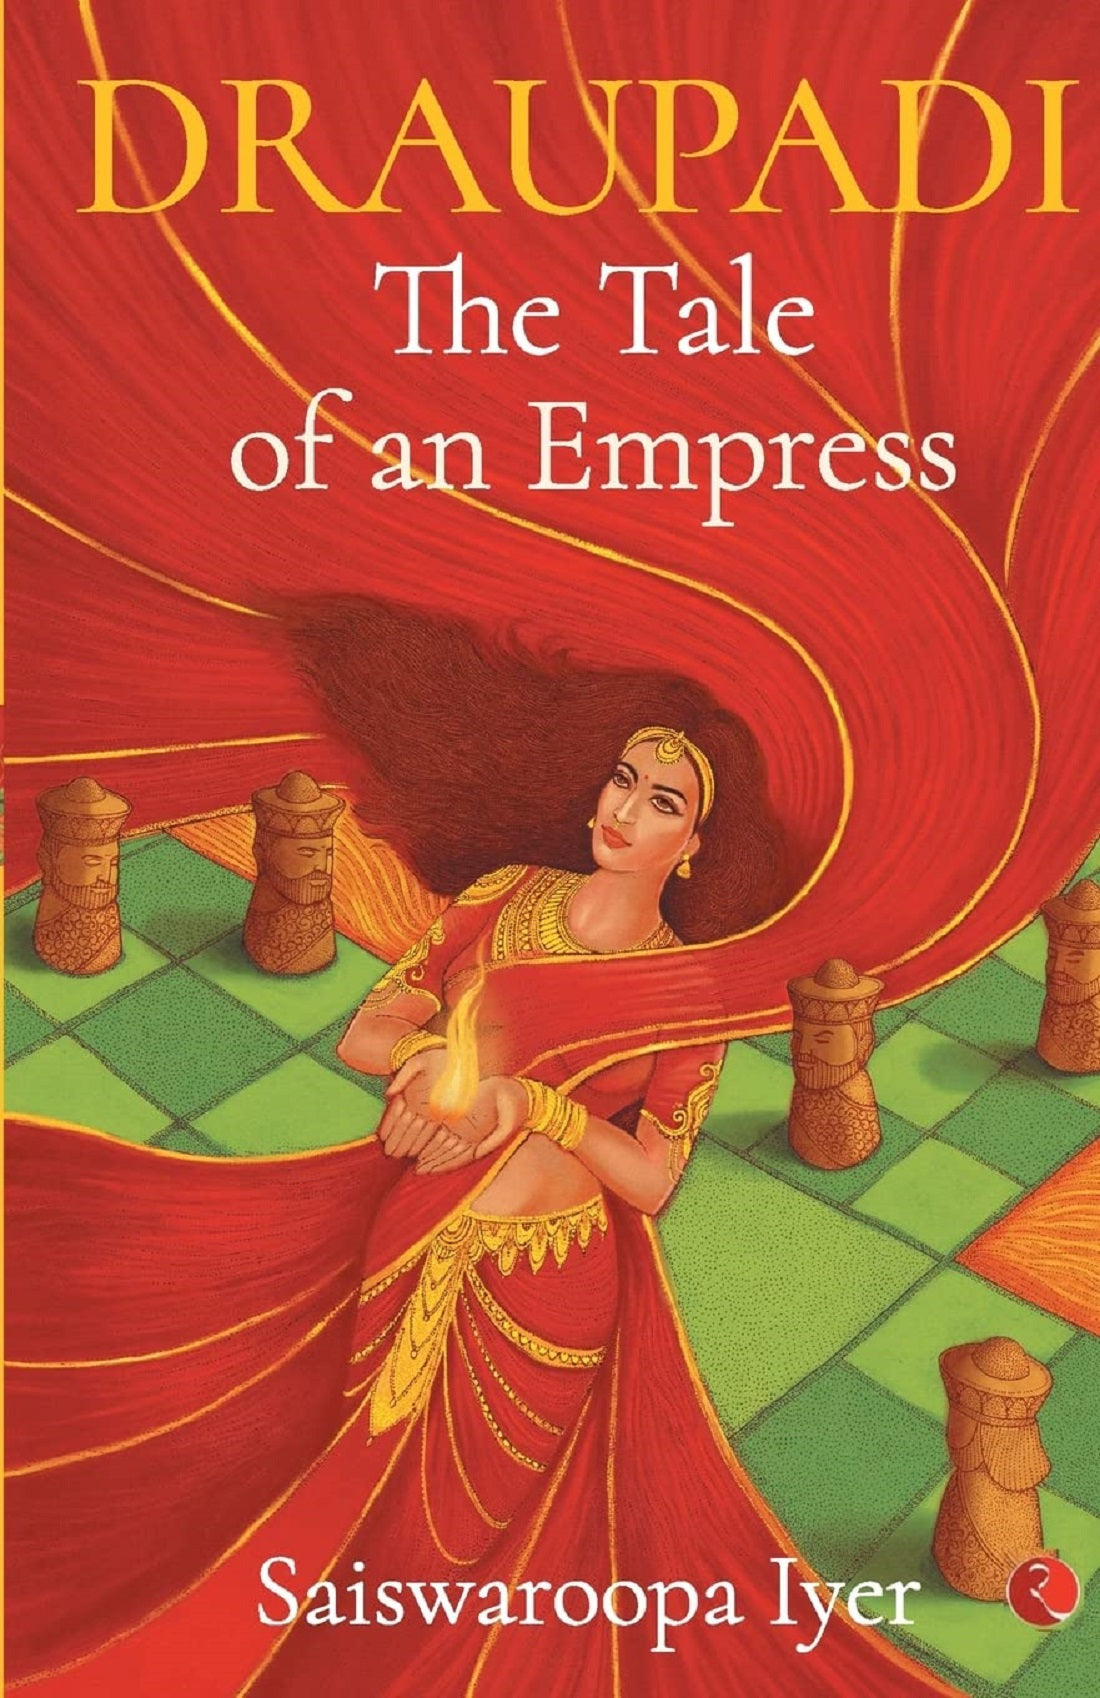 DRAUPADI THE TALE OF AN EMPRESS Book Online available at ...